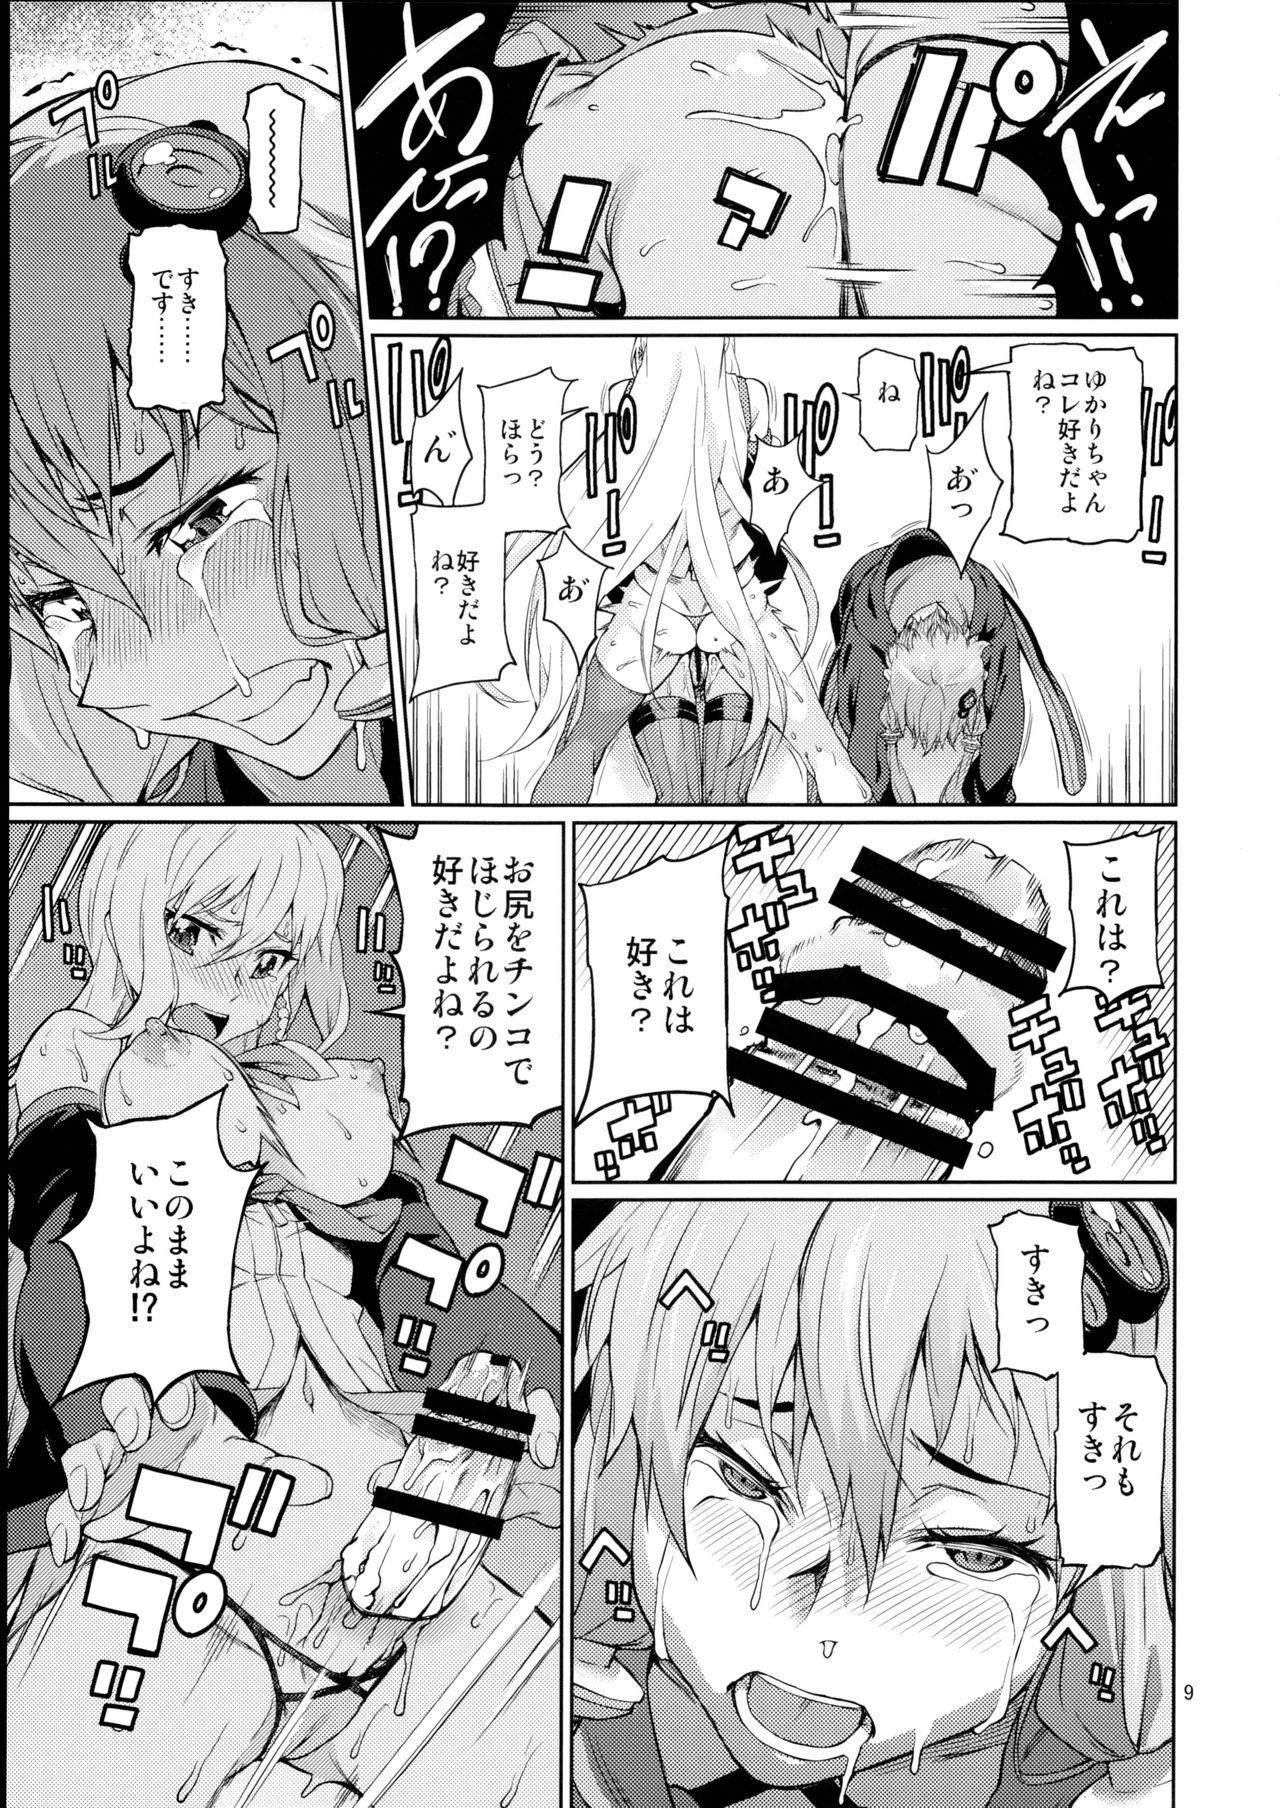 Fleshlight Y - Vocaloid Sextoy - Page 10